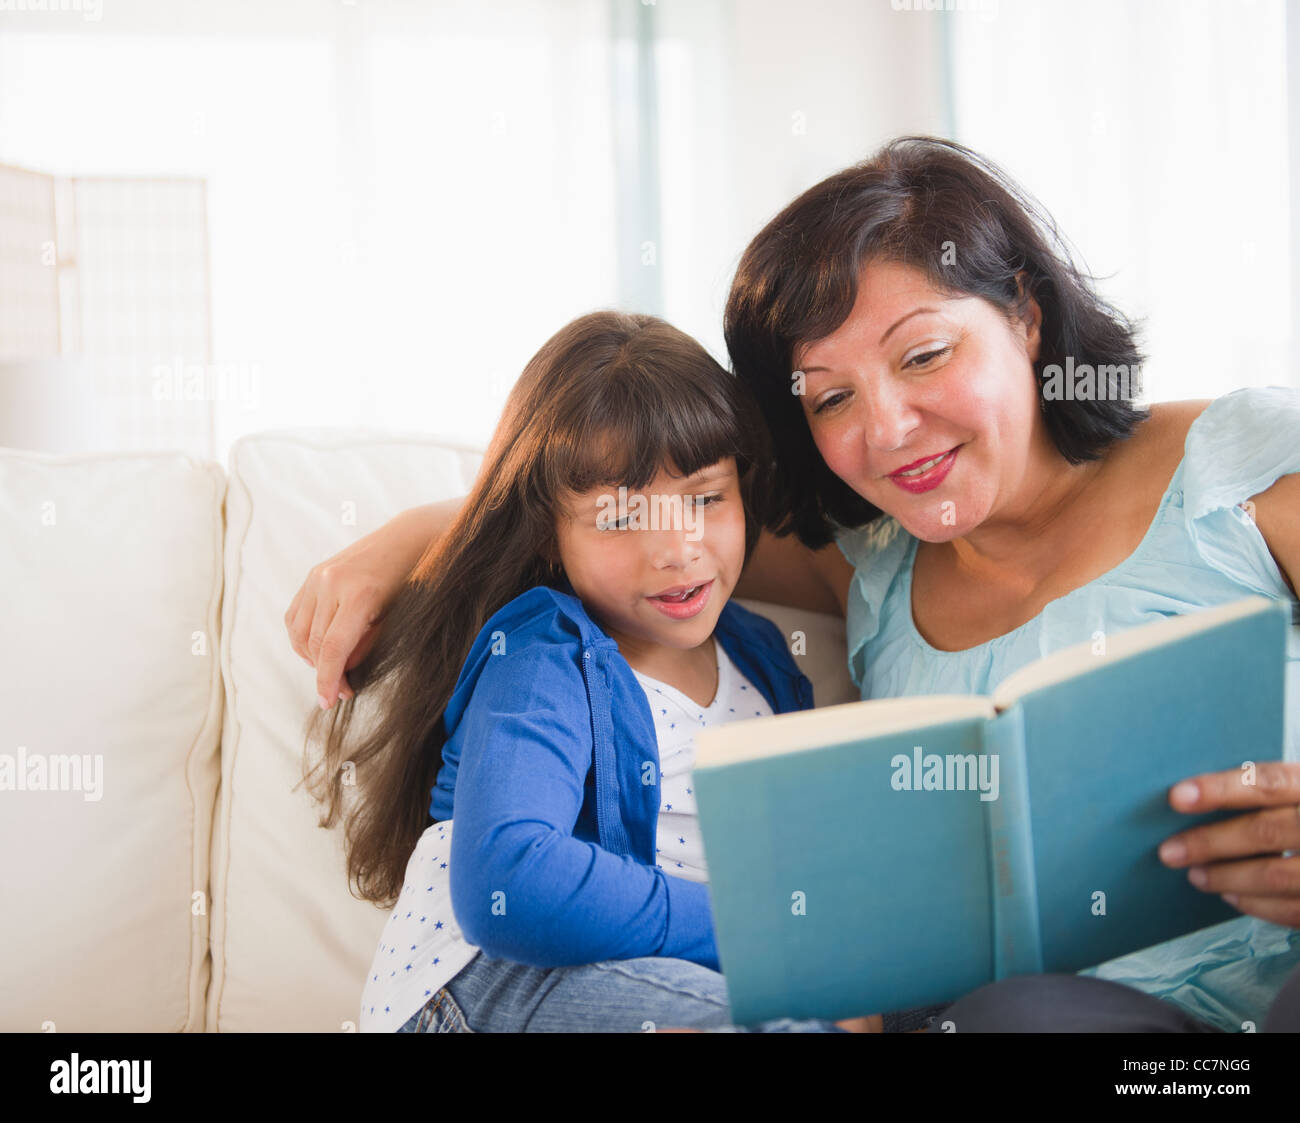 Hispanic mother and daughter reading a book Stock Photo